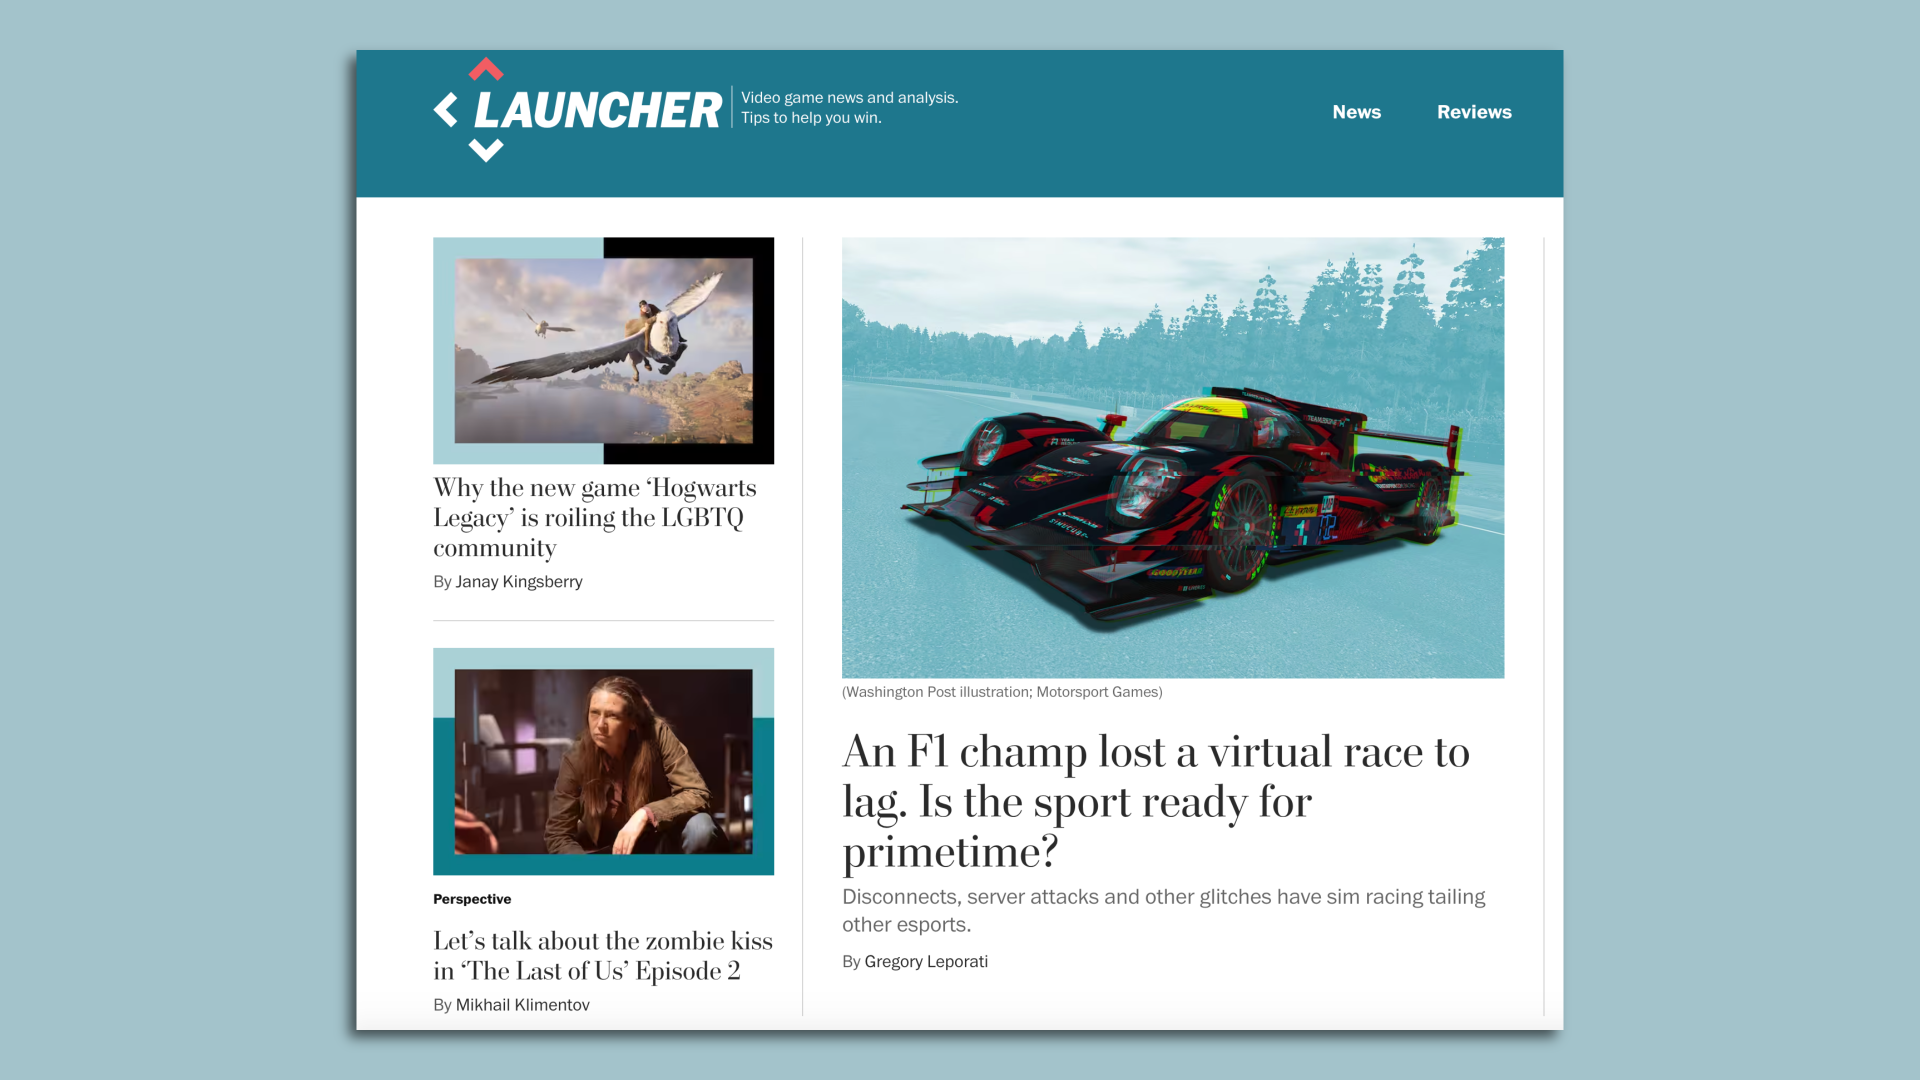 The front page of Launcher in The Washington Post.